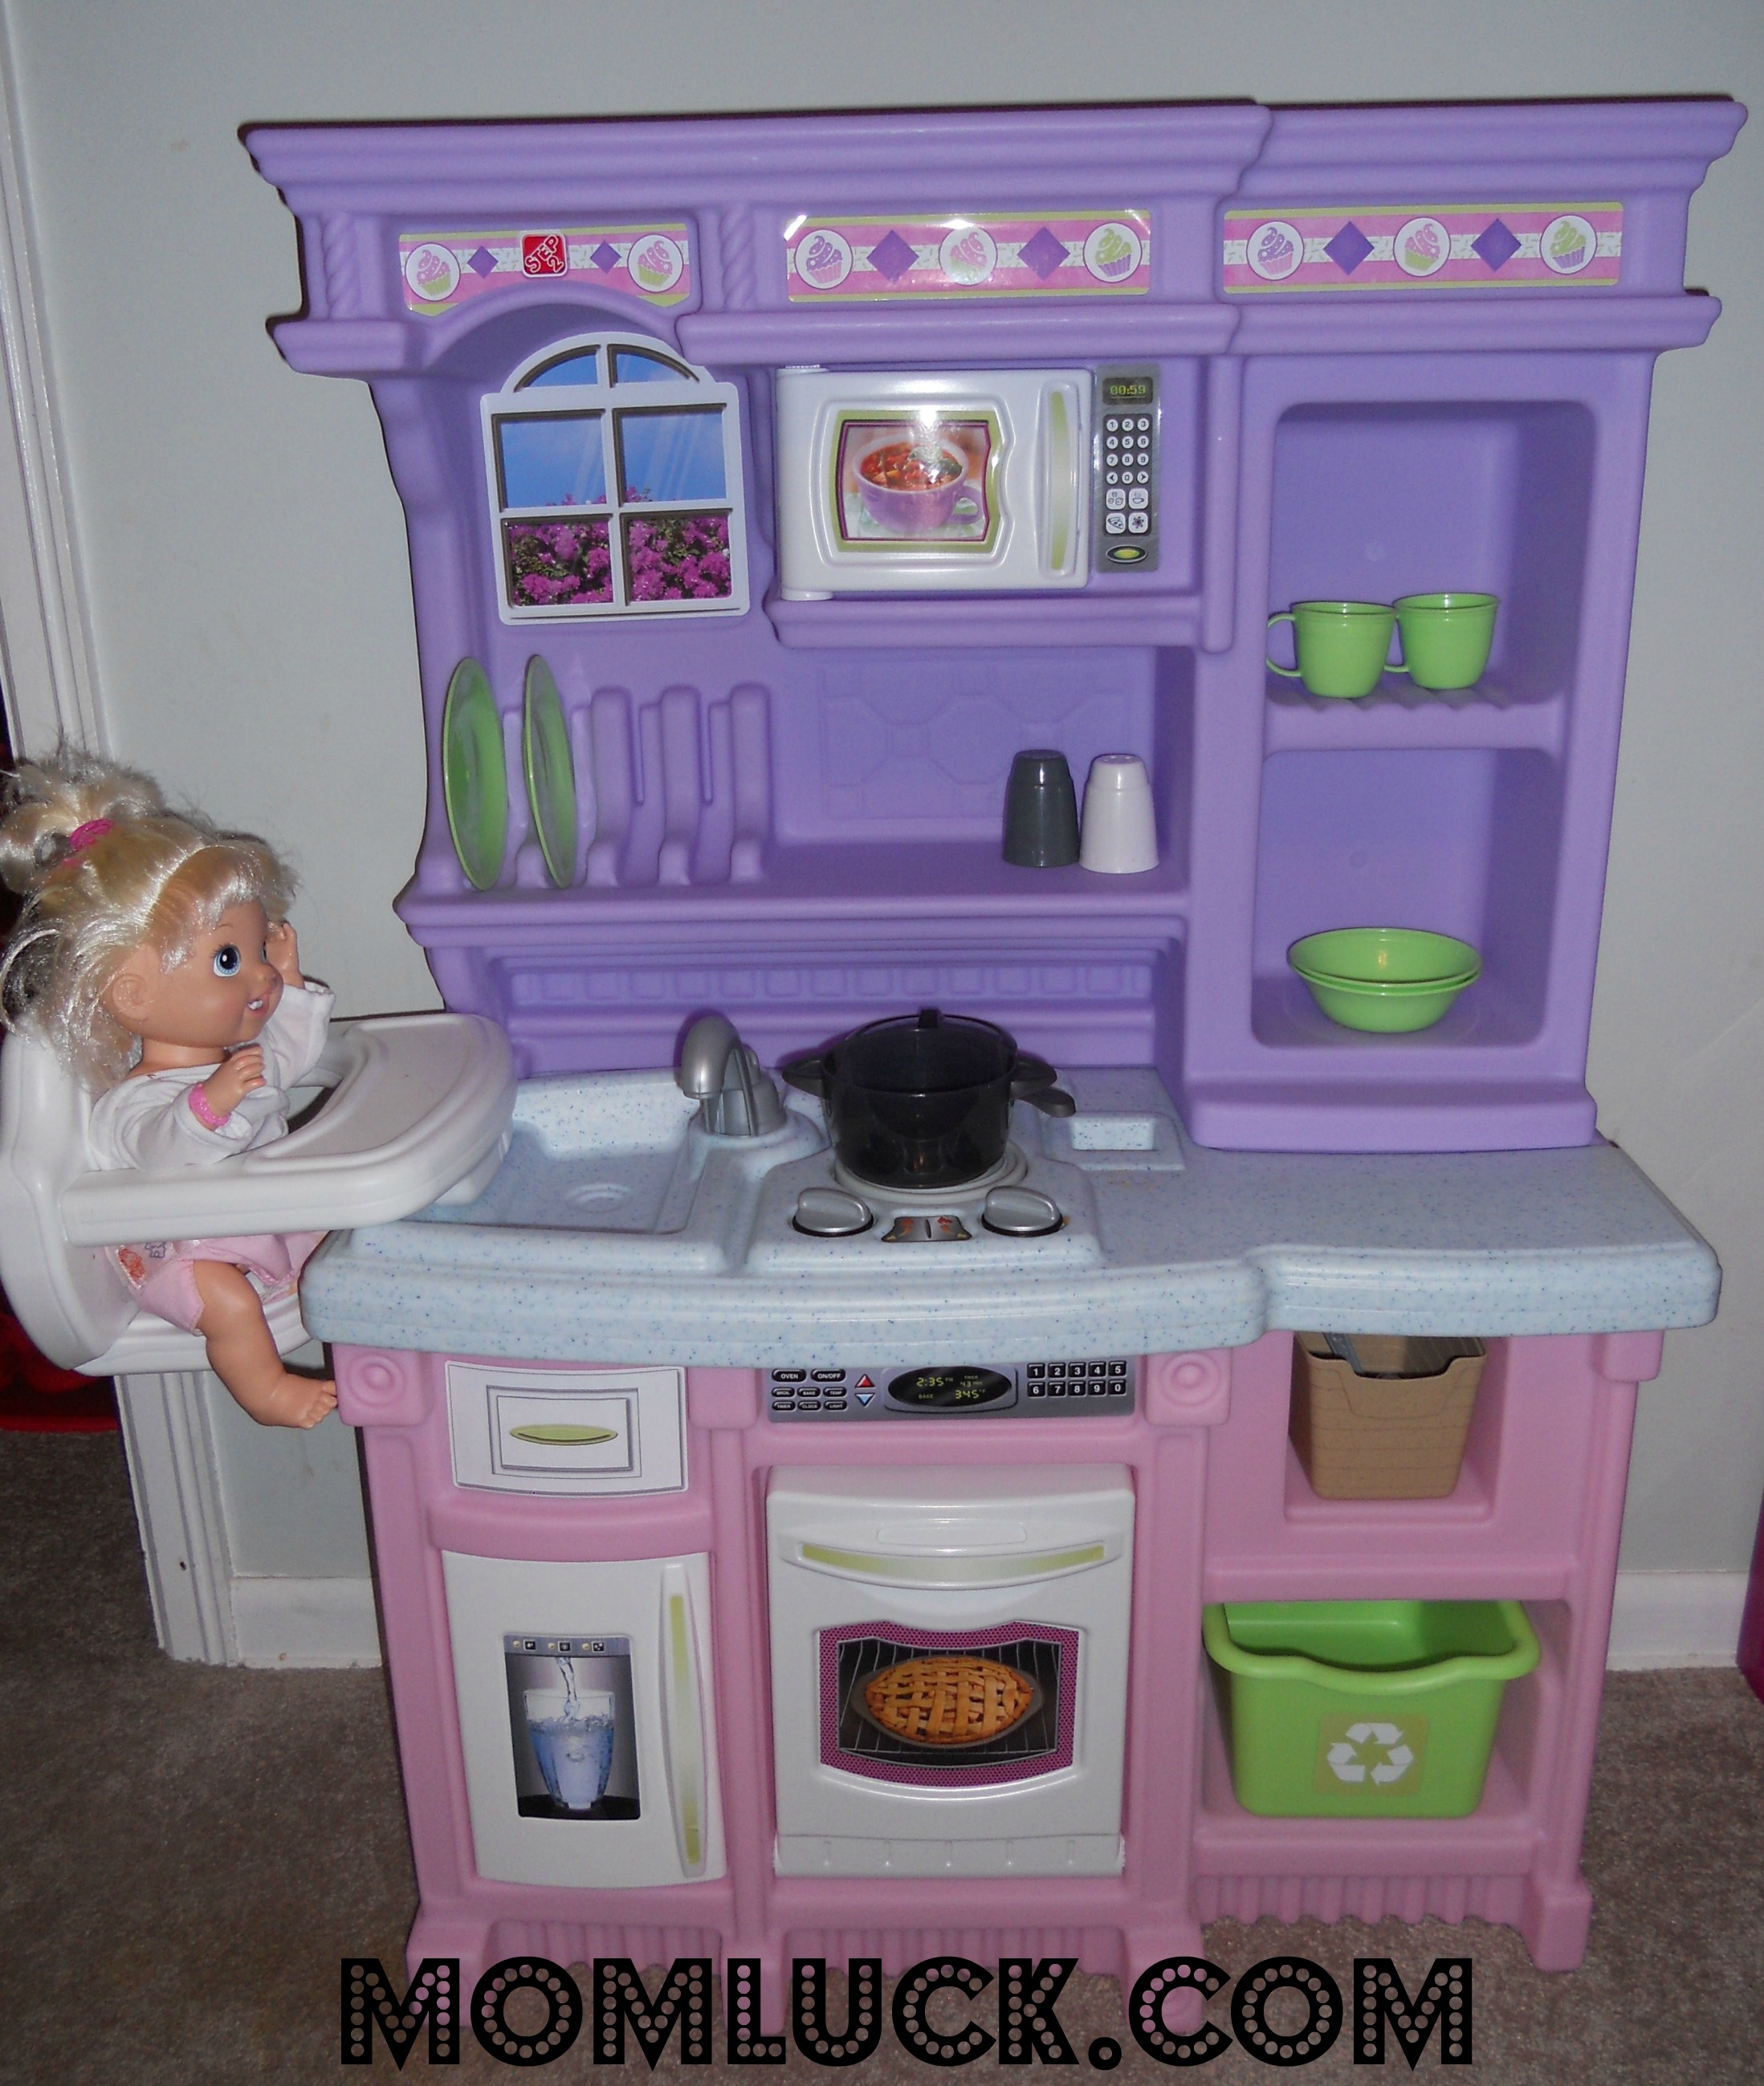 A Little Girls Dream Toy The Step2 Little Bakers Kitchen Mom Luck